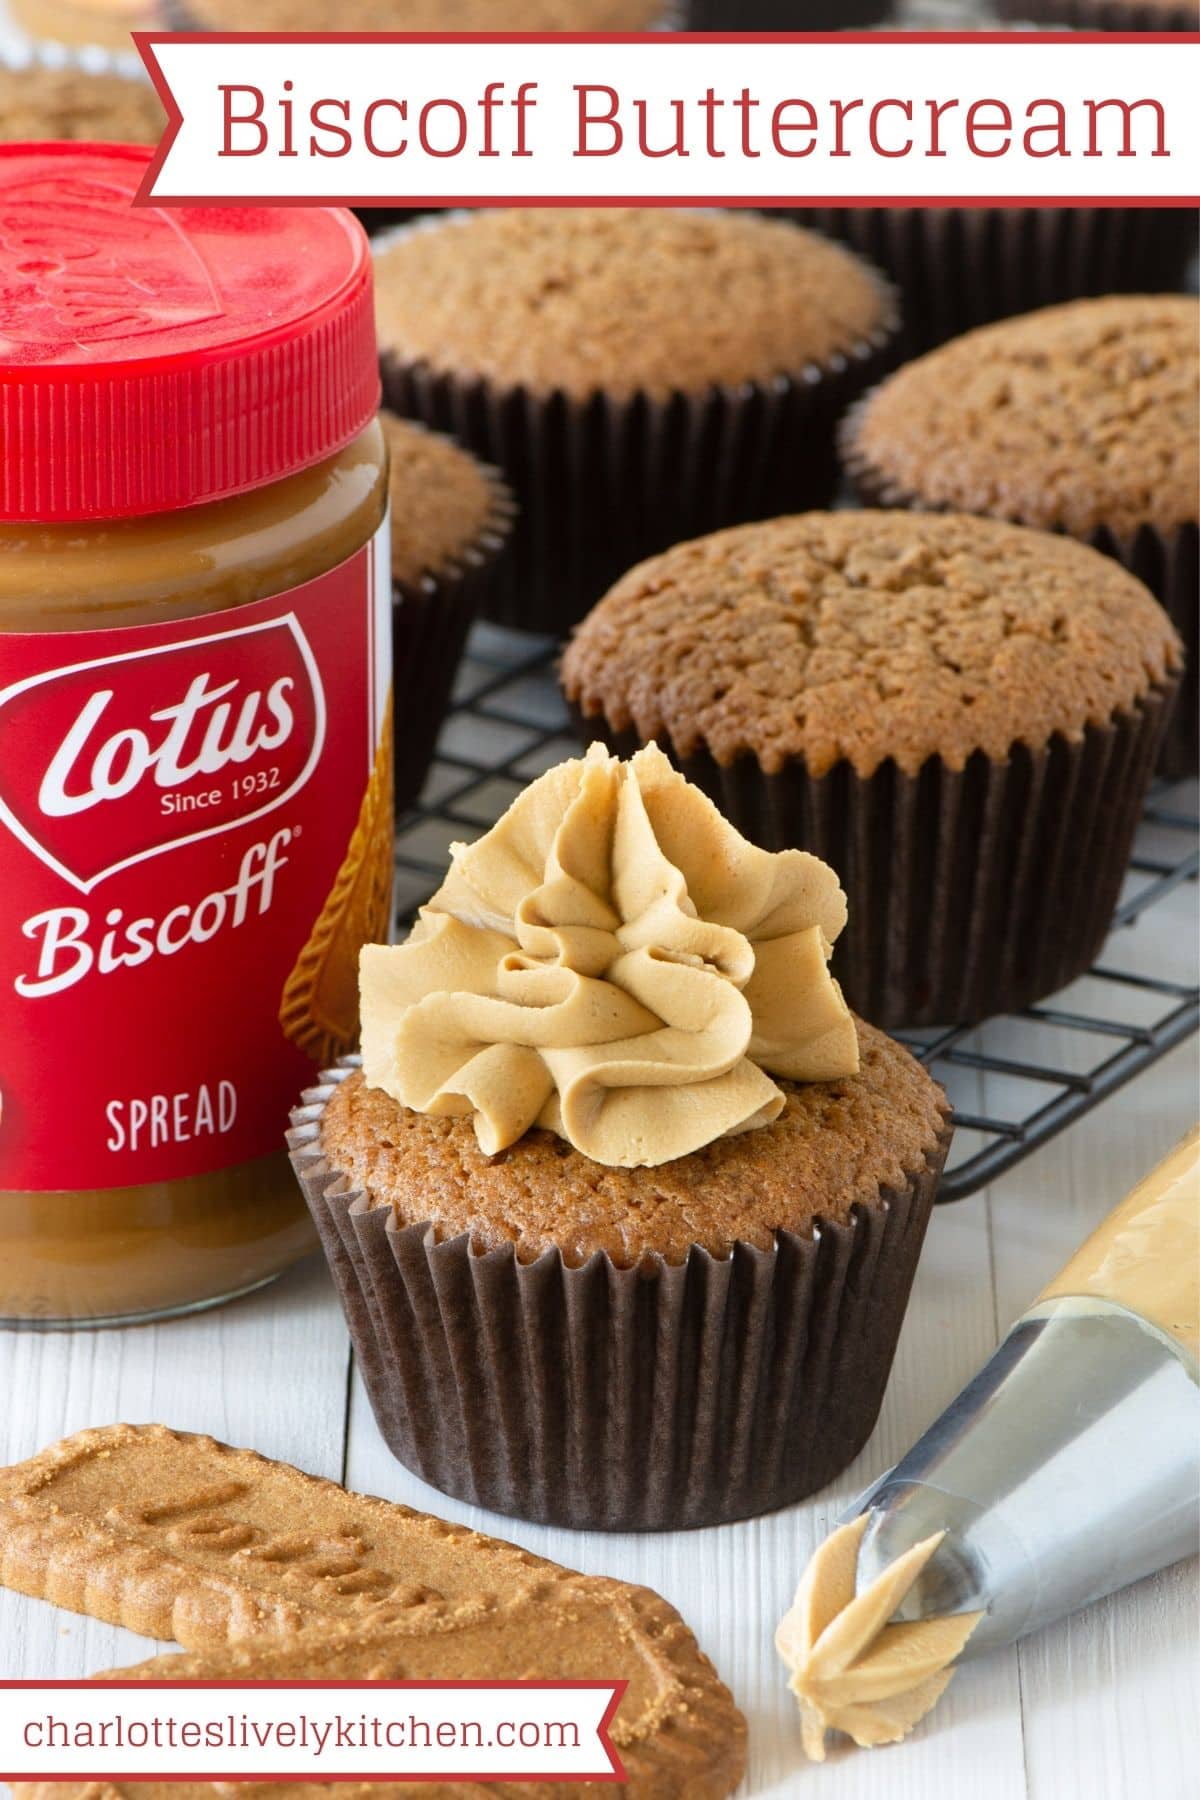 A cupcake topped with Biscoff buttercream next to a jar of Lotus Biscoff spread and a piping bag filled with buttercream.